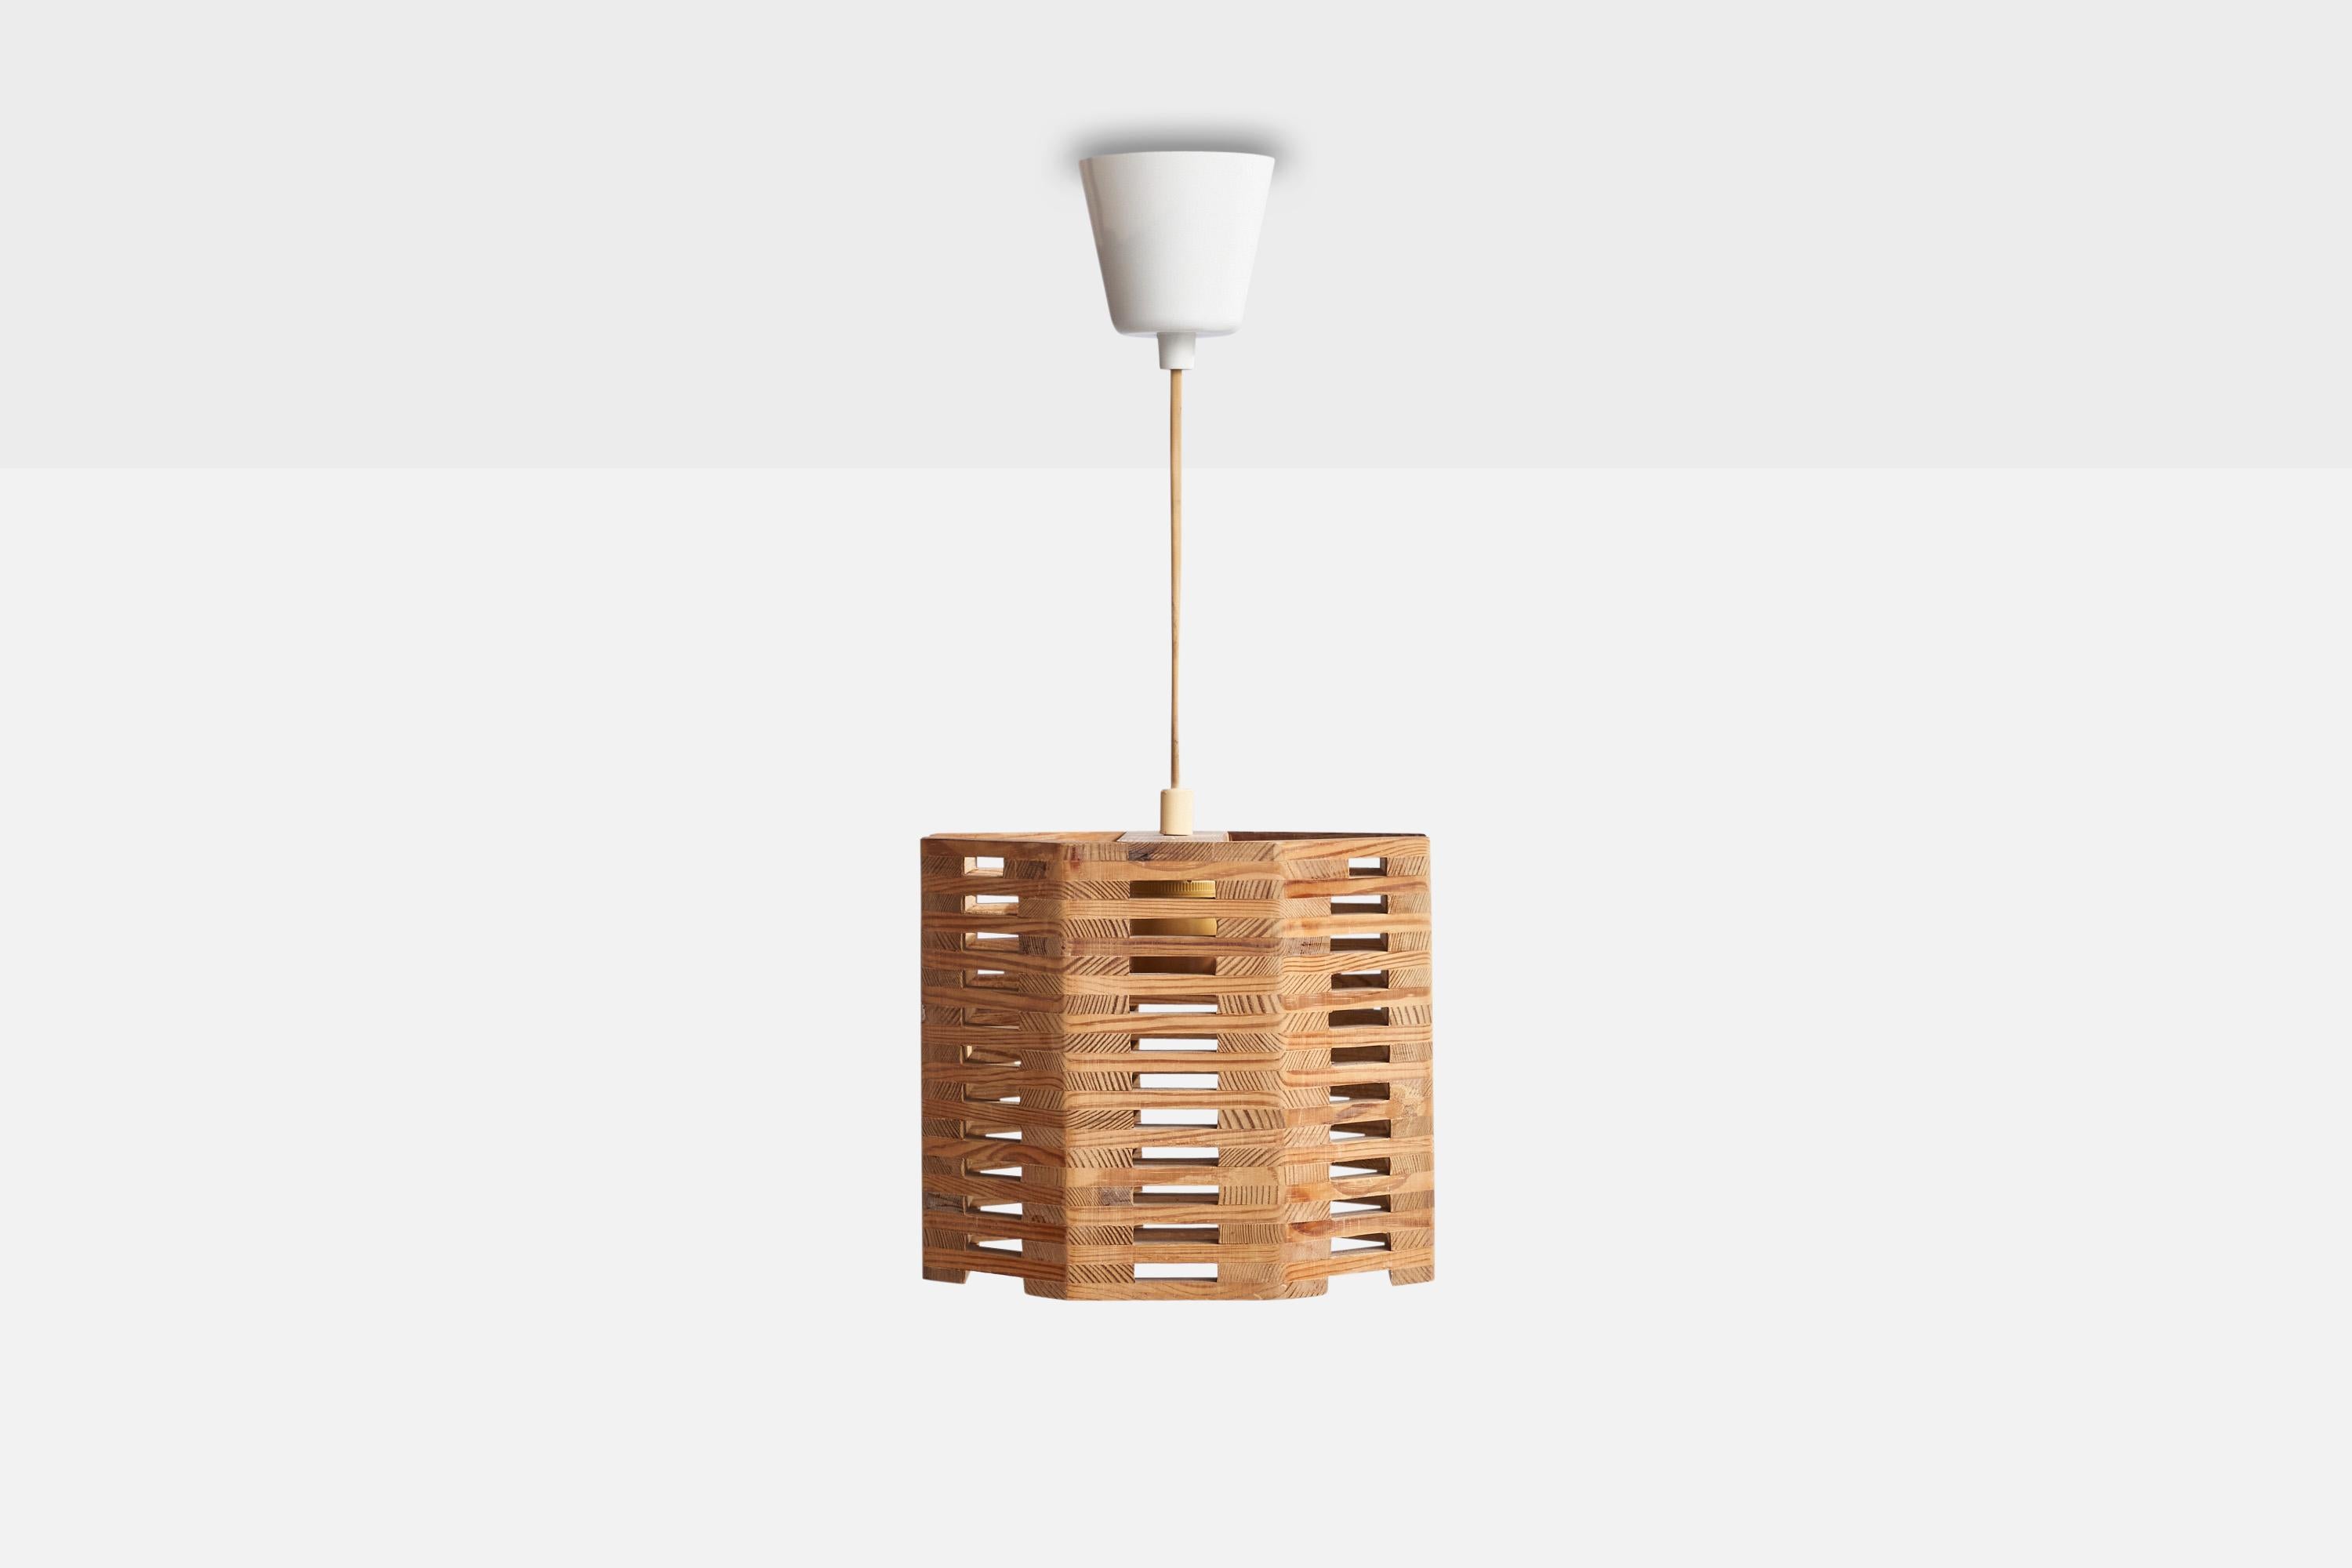 A pine pendant light designed and produced in Sweden, 1970s.

Dimensions of canopy (inches): 3”  H x 3.5” Diameter
Socket takes standard E-26 bulbs. 1 socket.There is no maximum wattage stated on the fixture. All lighting will be converted for US